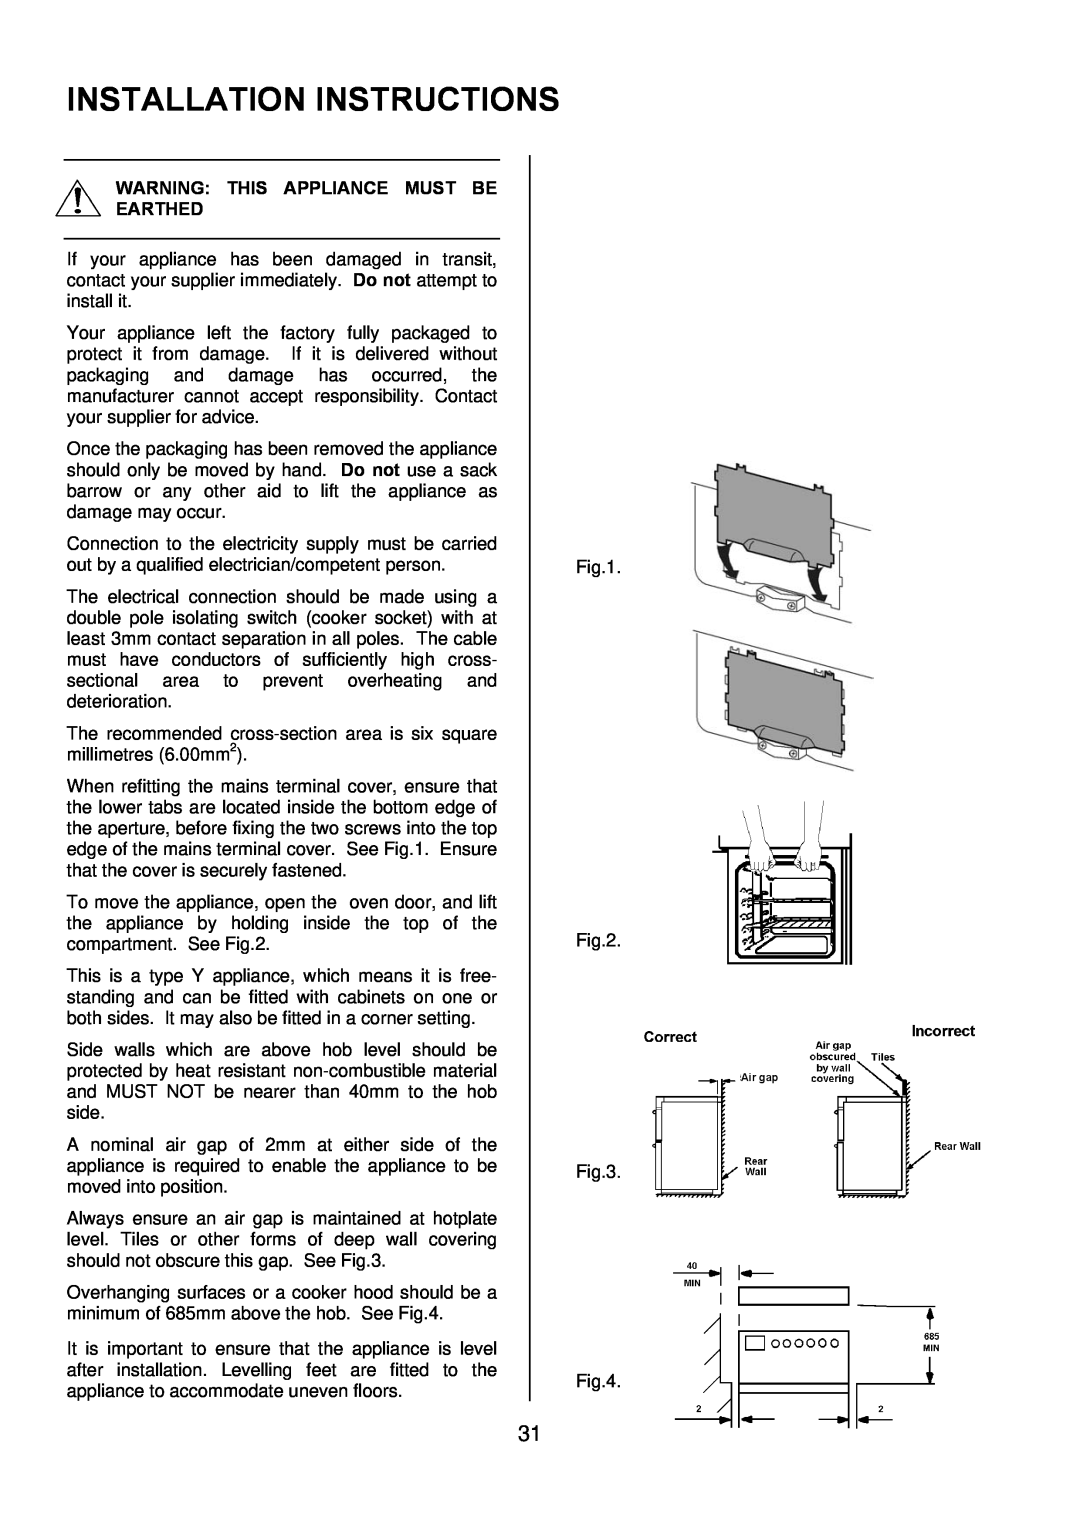 Electrolux EKC6044, EKC6045 manual Installation Instructions, Warning This Appliance Must Be Earthed 